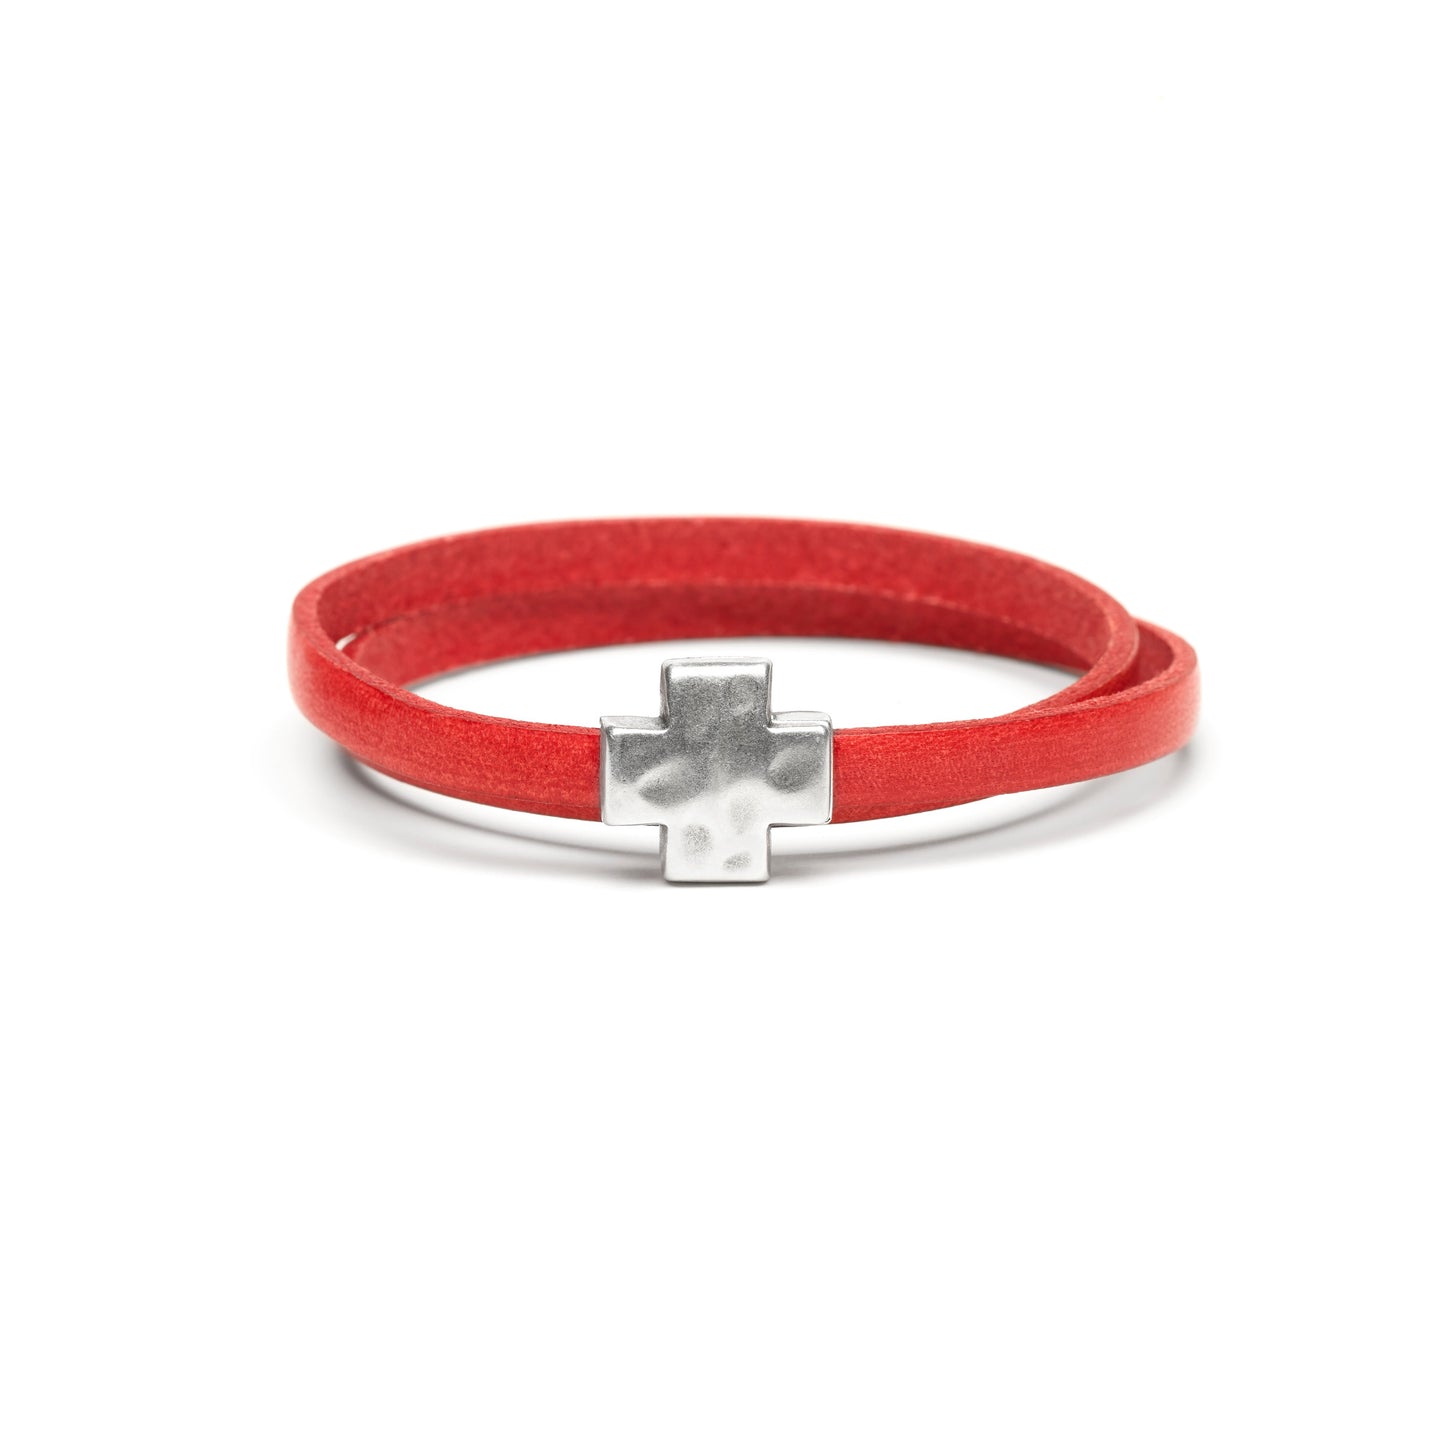 "Wrap it Up Bracelet" with Silver Cross - Double Length - Red